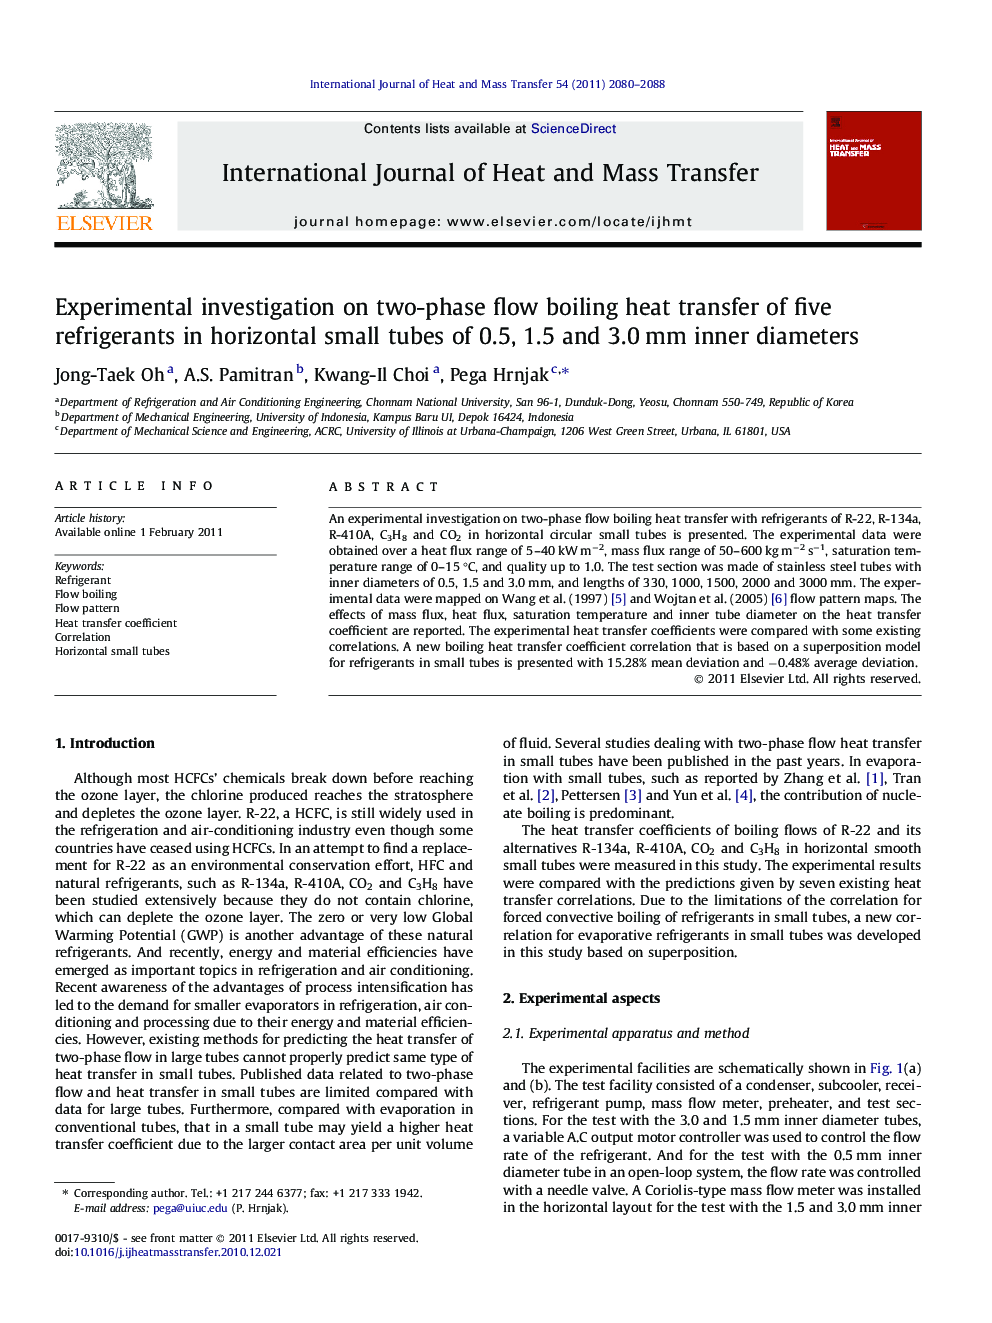 Experimental investigation on two-phase flow boiling heat transfer of five refrigerants in horizontal small tubes of 0.5, 1.5 and 3.0Â mm inner diameters